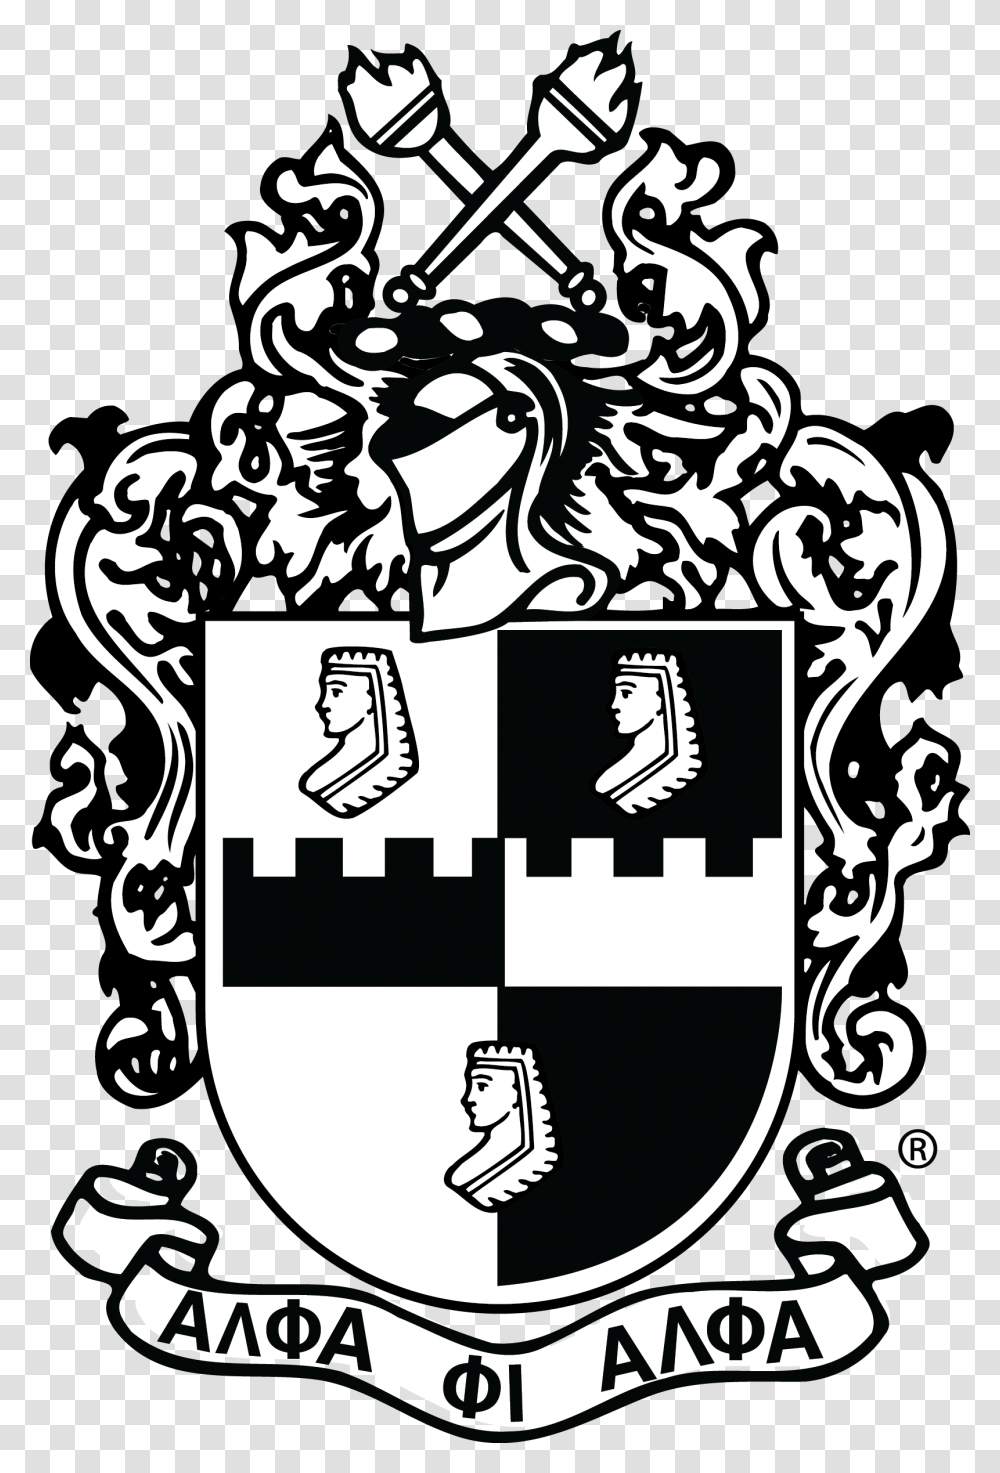 Alpha Phi Alpha Crest Alpha Phi Alpha Crest Black And White, Armor, Shield Transparent Png